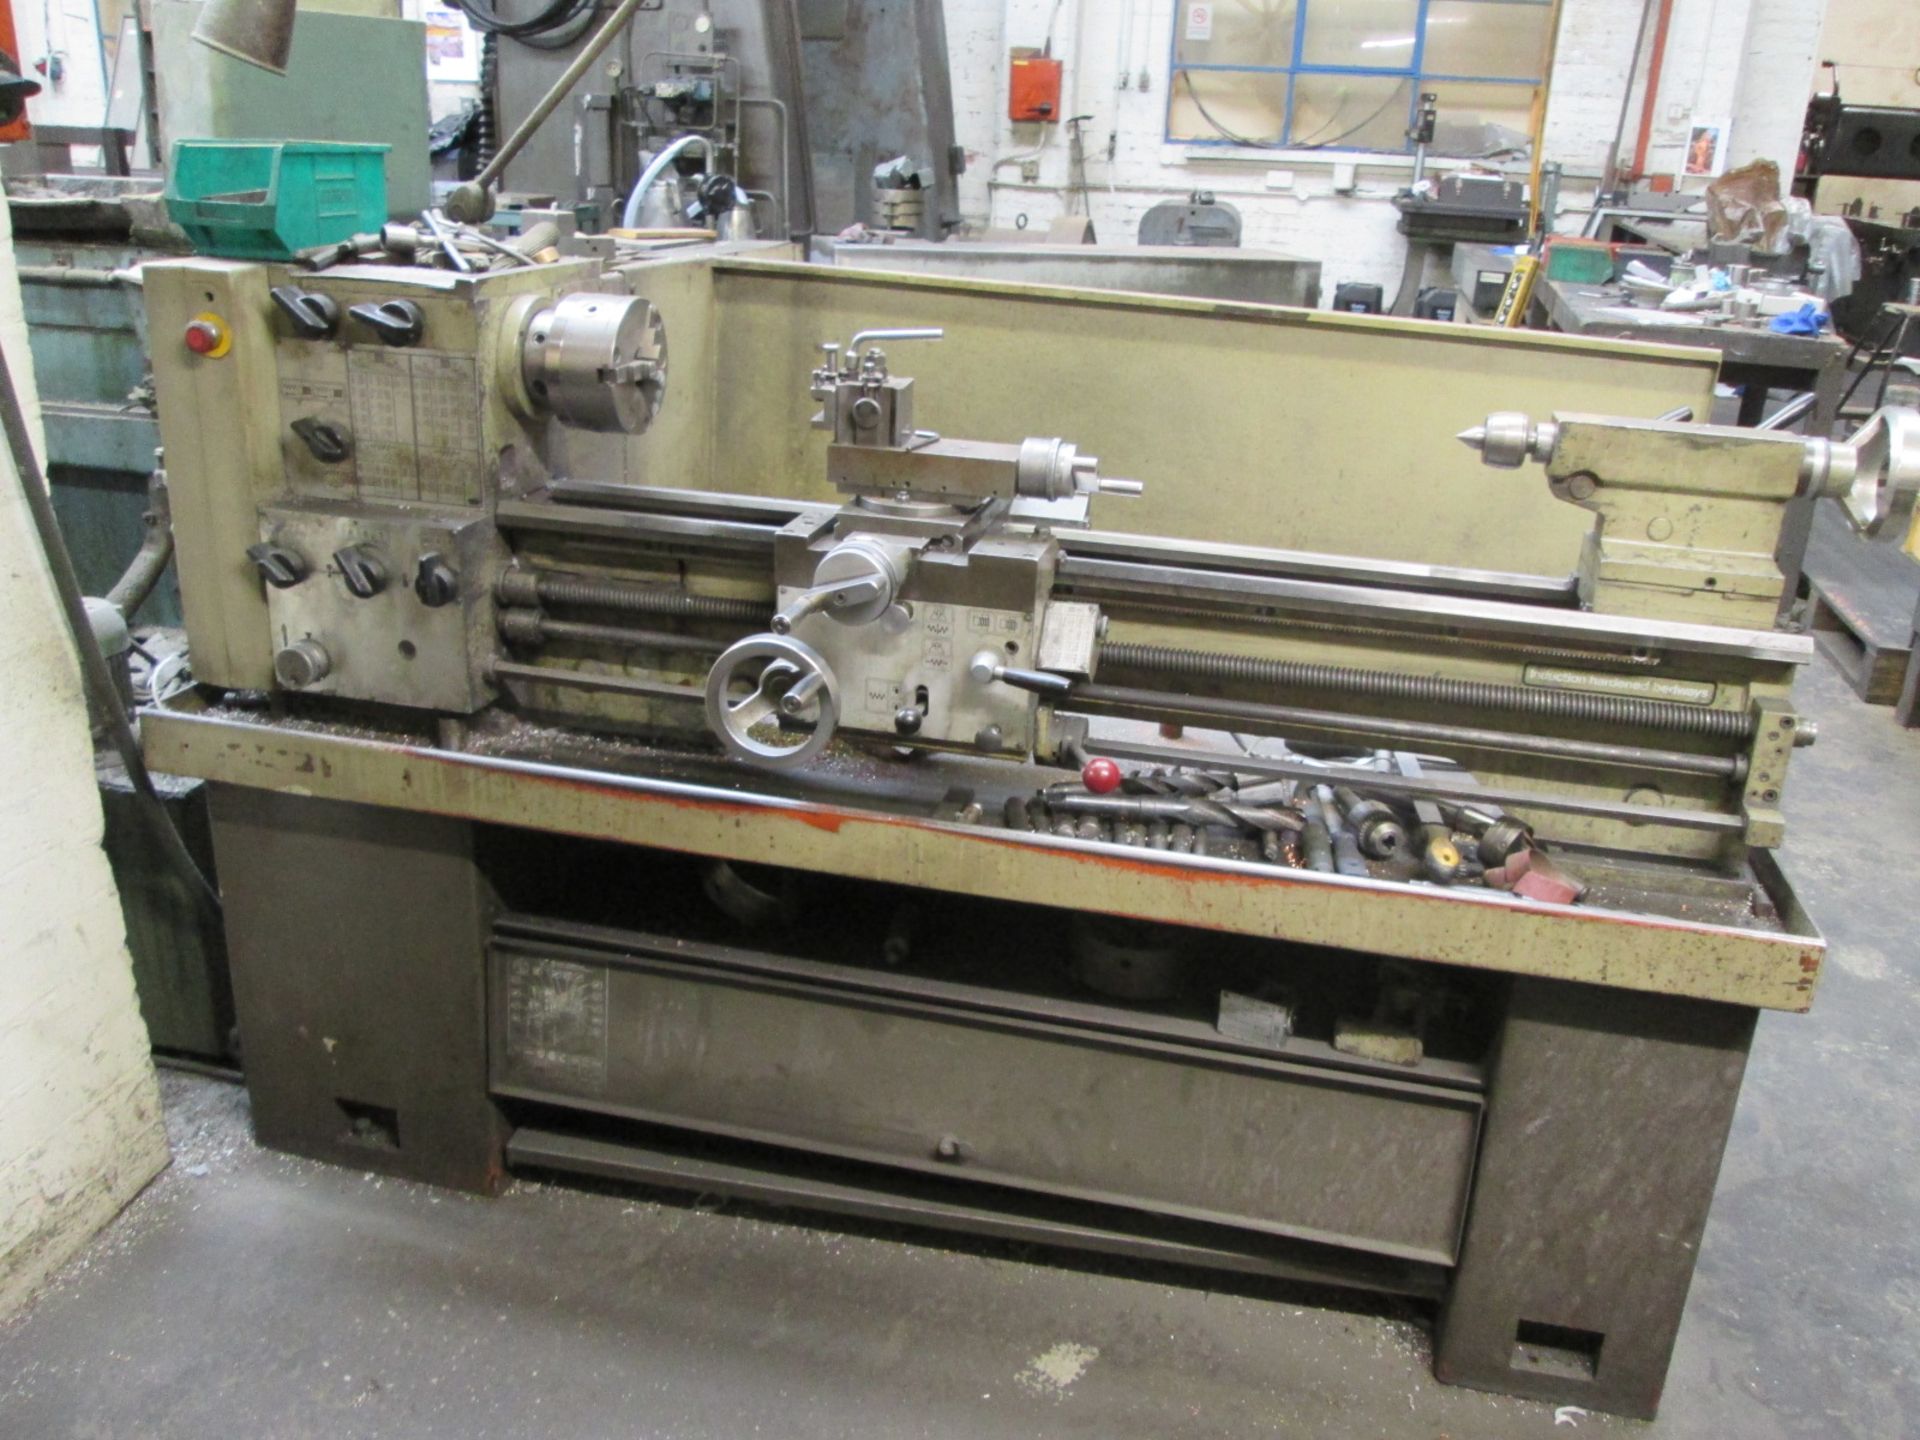 Harrison Gap Bed Centre Lathe, Distance between centres 1000 mm, Swing over bed 320 mm diameter,